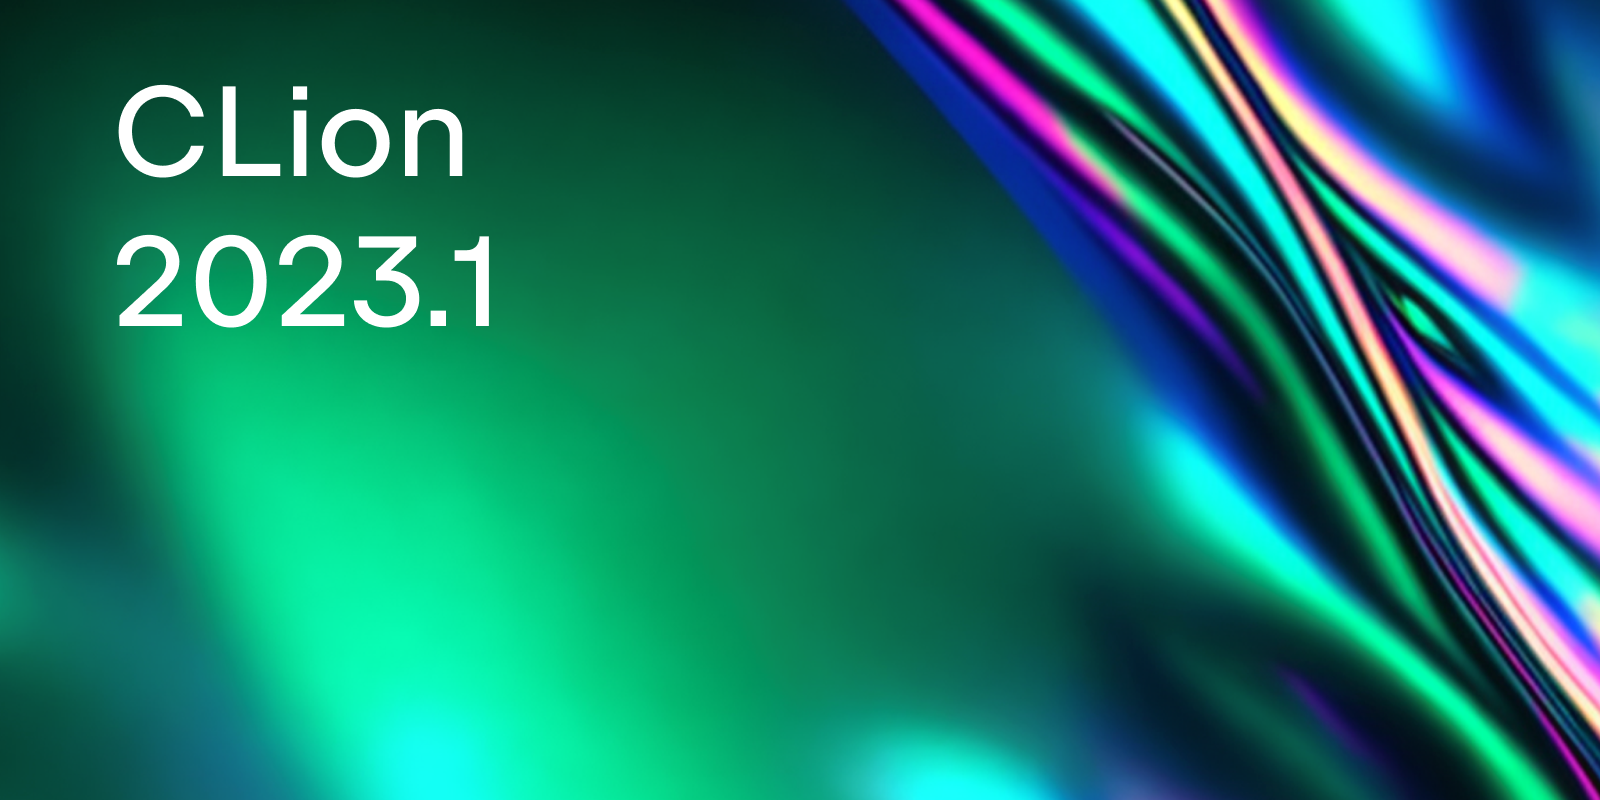 JetBrains CLion 2023.1.4 instal the last version for ipod